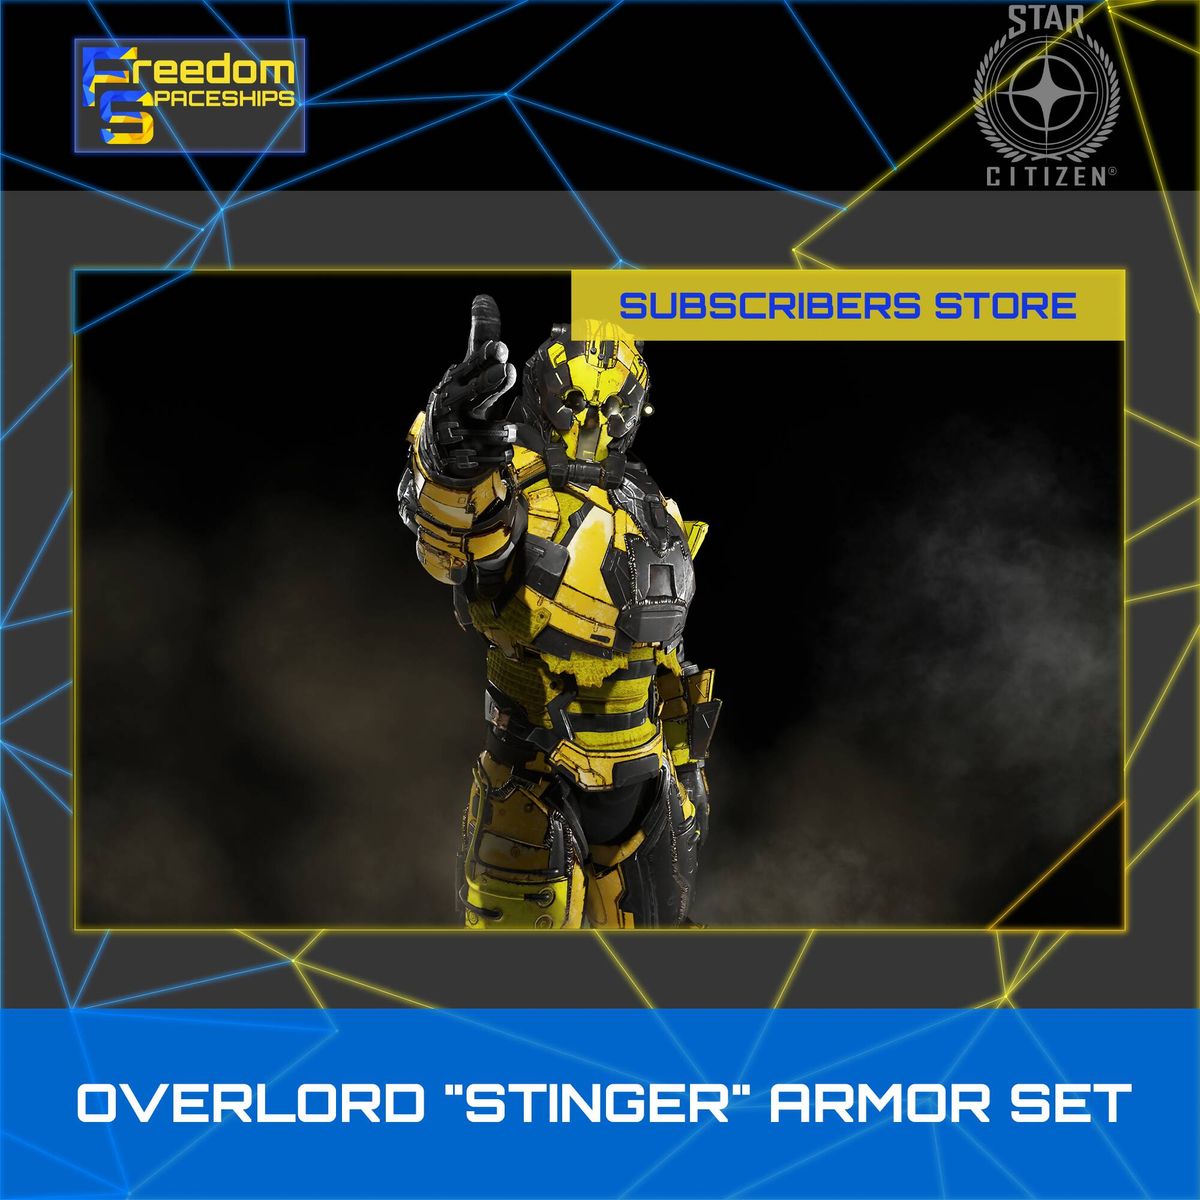 Subscribers Store - Overlord Stinger Armor Set